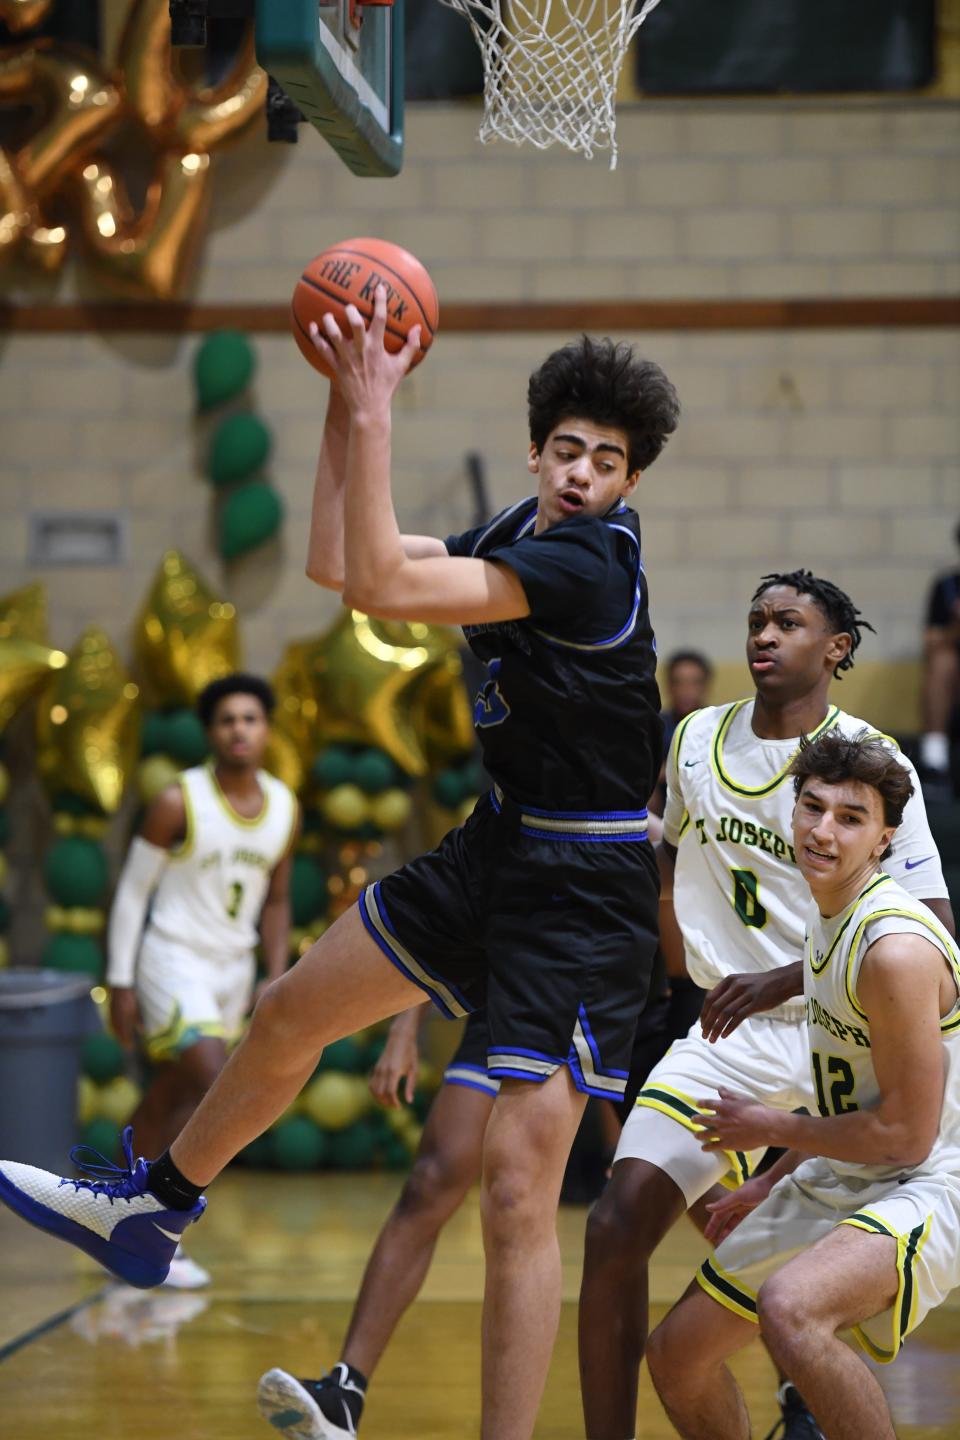 Tyler Tejada, shown here earlier in his career, led Teaneck to a 68-62 win over Eastside in the Teaneck Classic Showcase on Saturday, January 21, 2023.